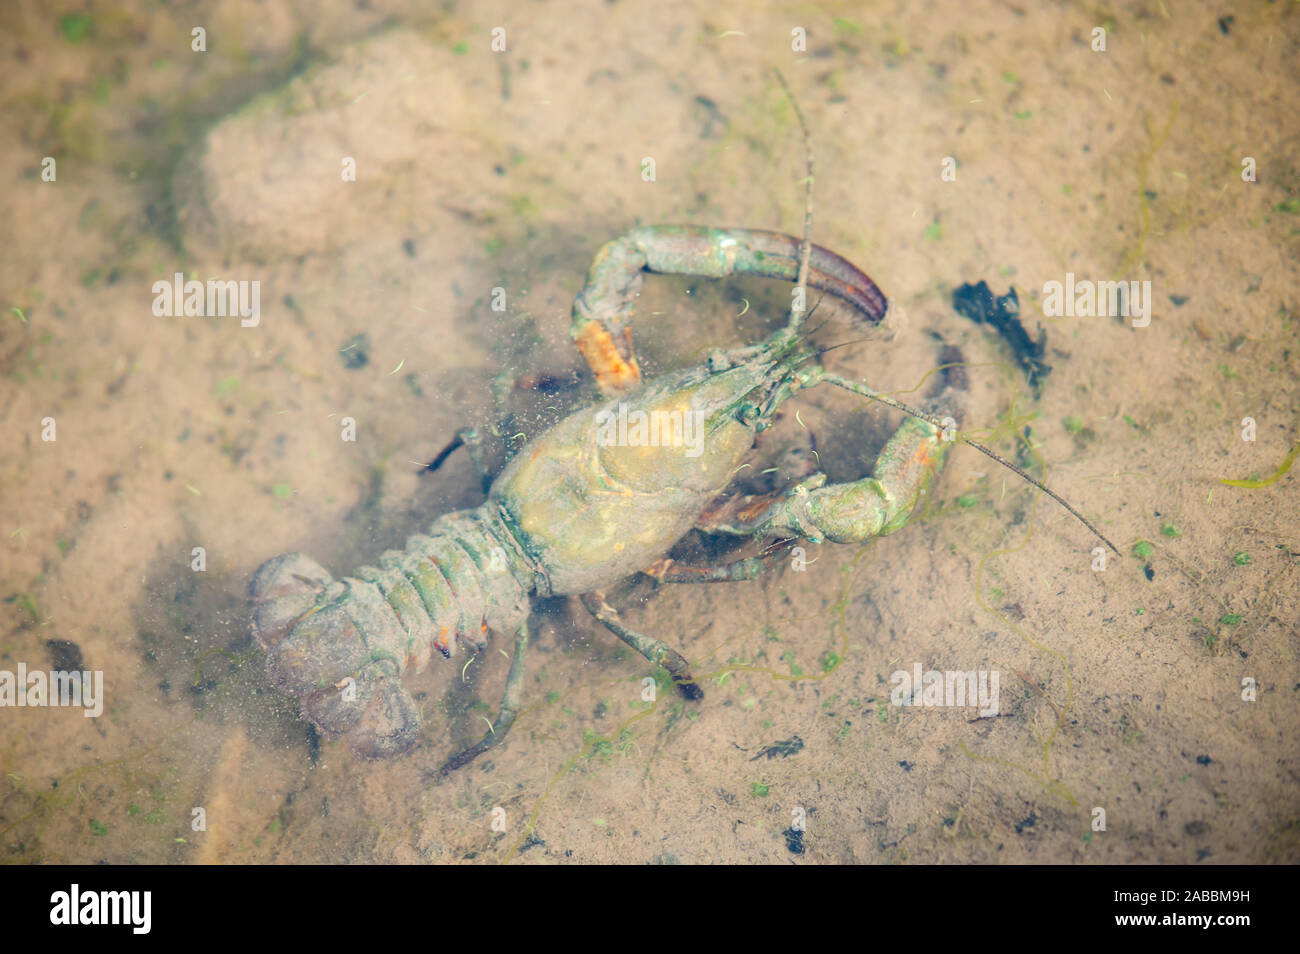 Top view of a crayfish in shallow water Stock Photo